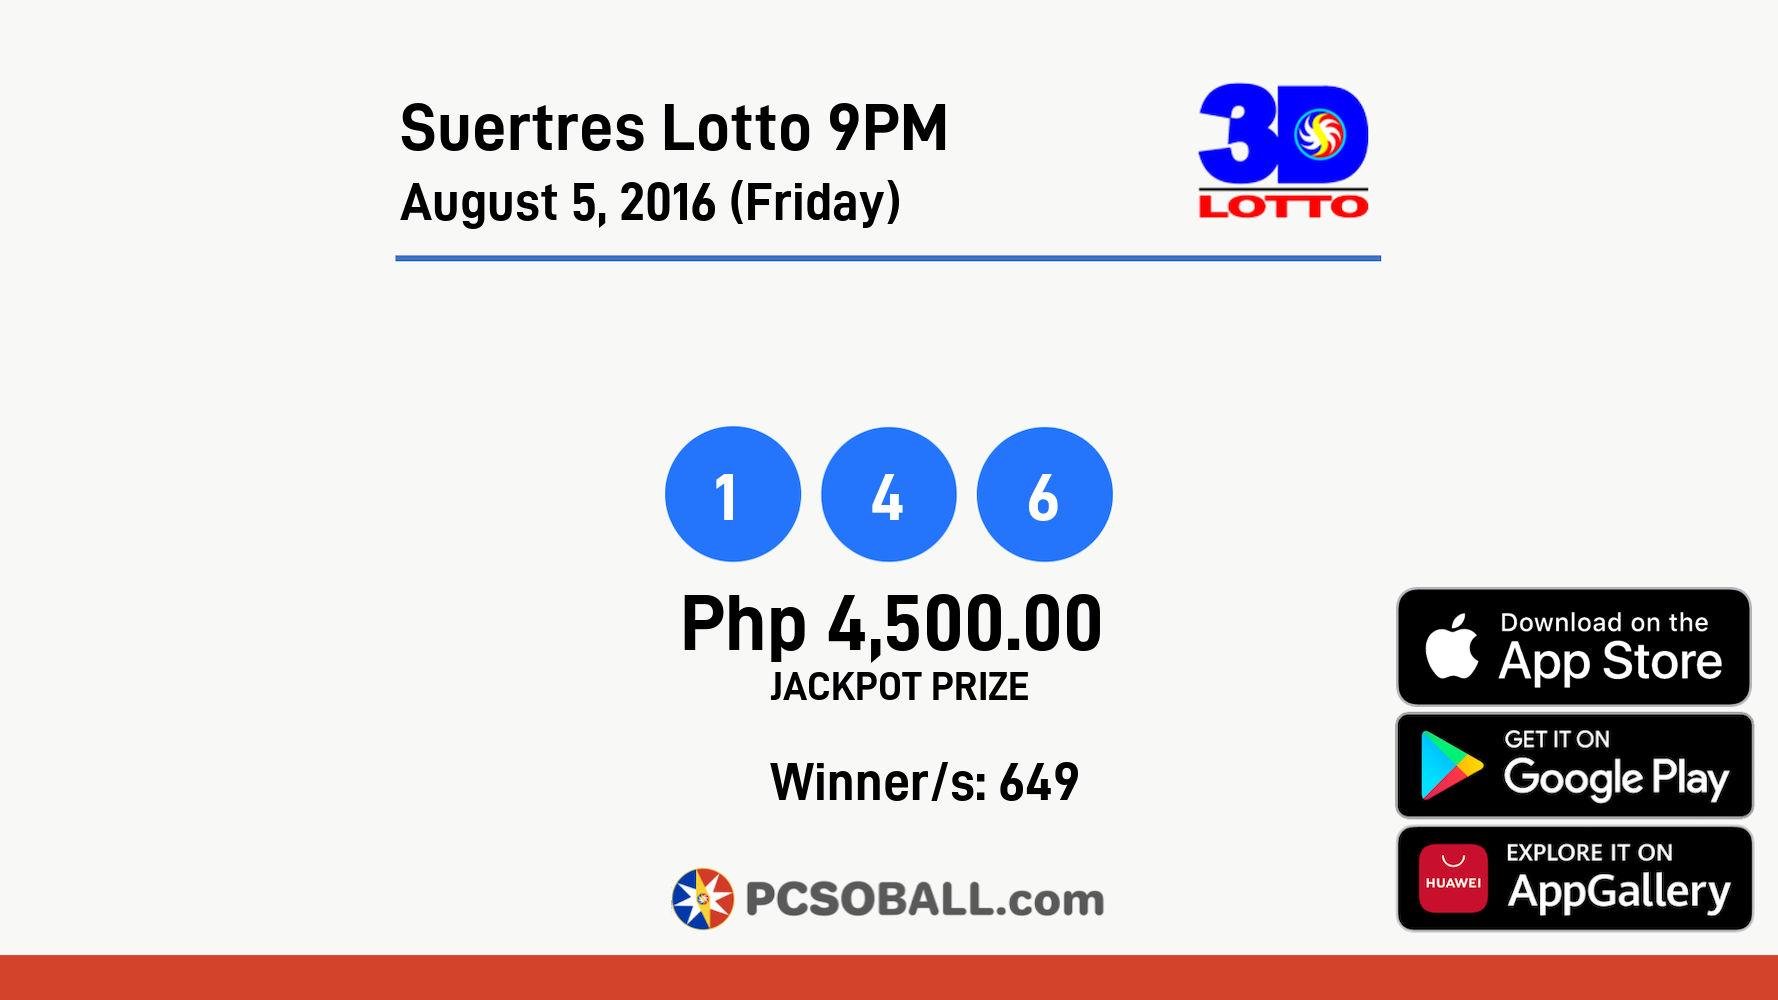 Suertres Lotto 9PM August 5, 2016 (Friday) Result